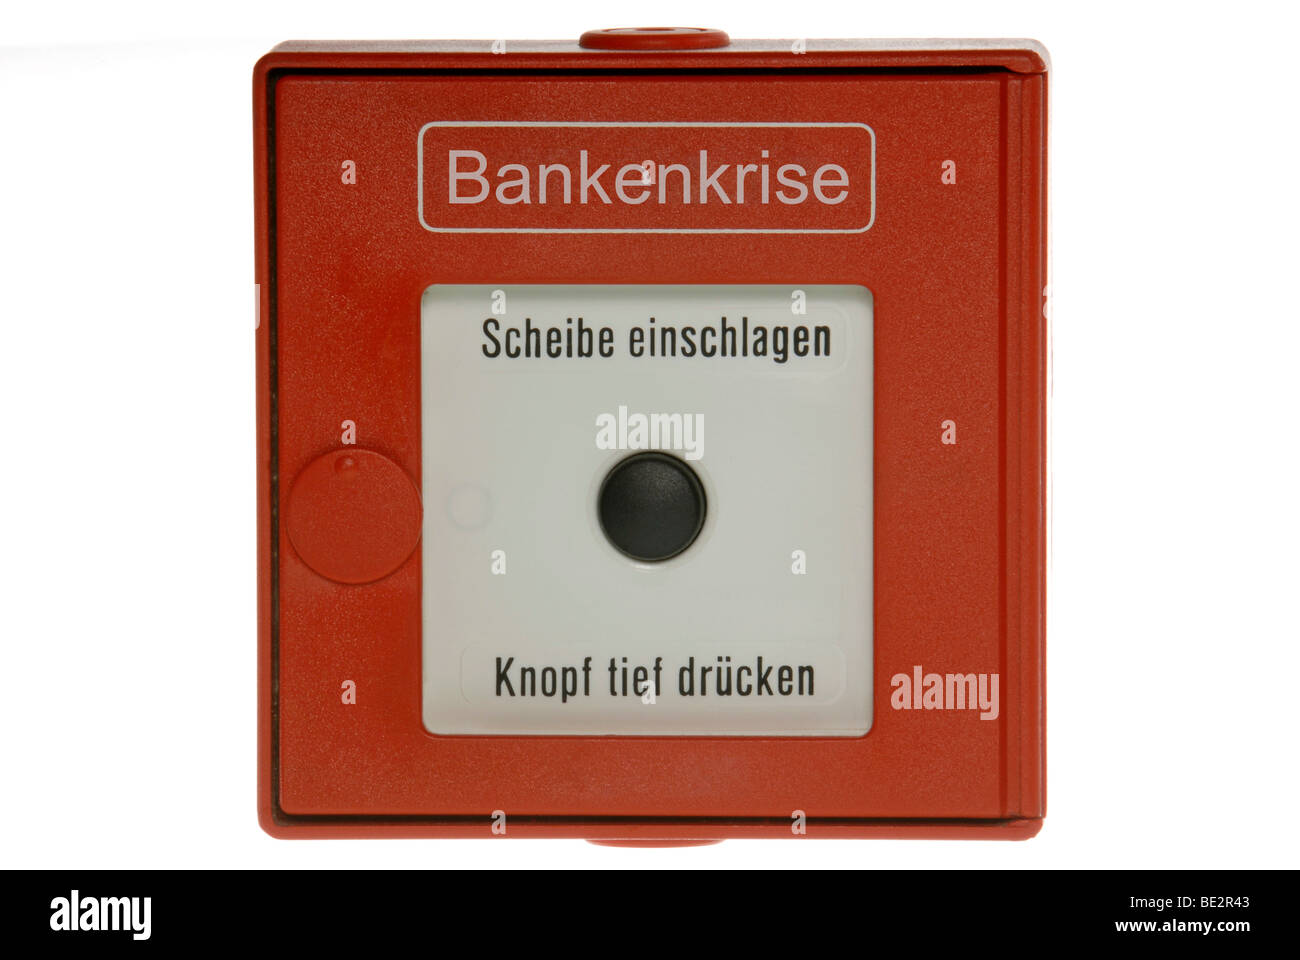 Fire alarm with lettering, banking crisis Stock Photo